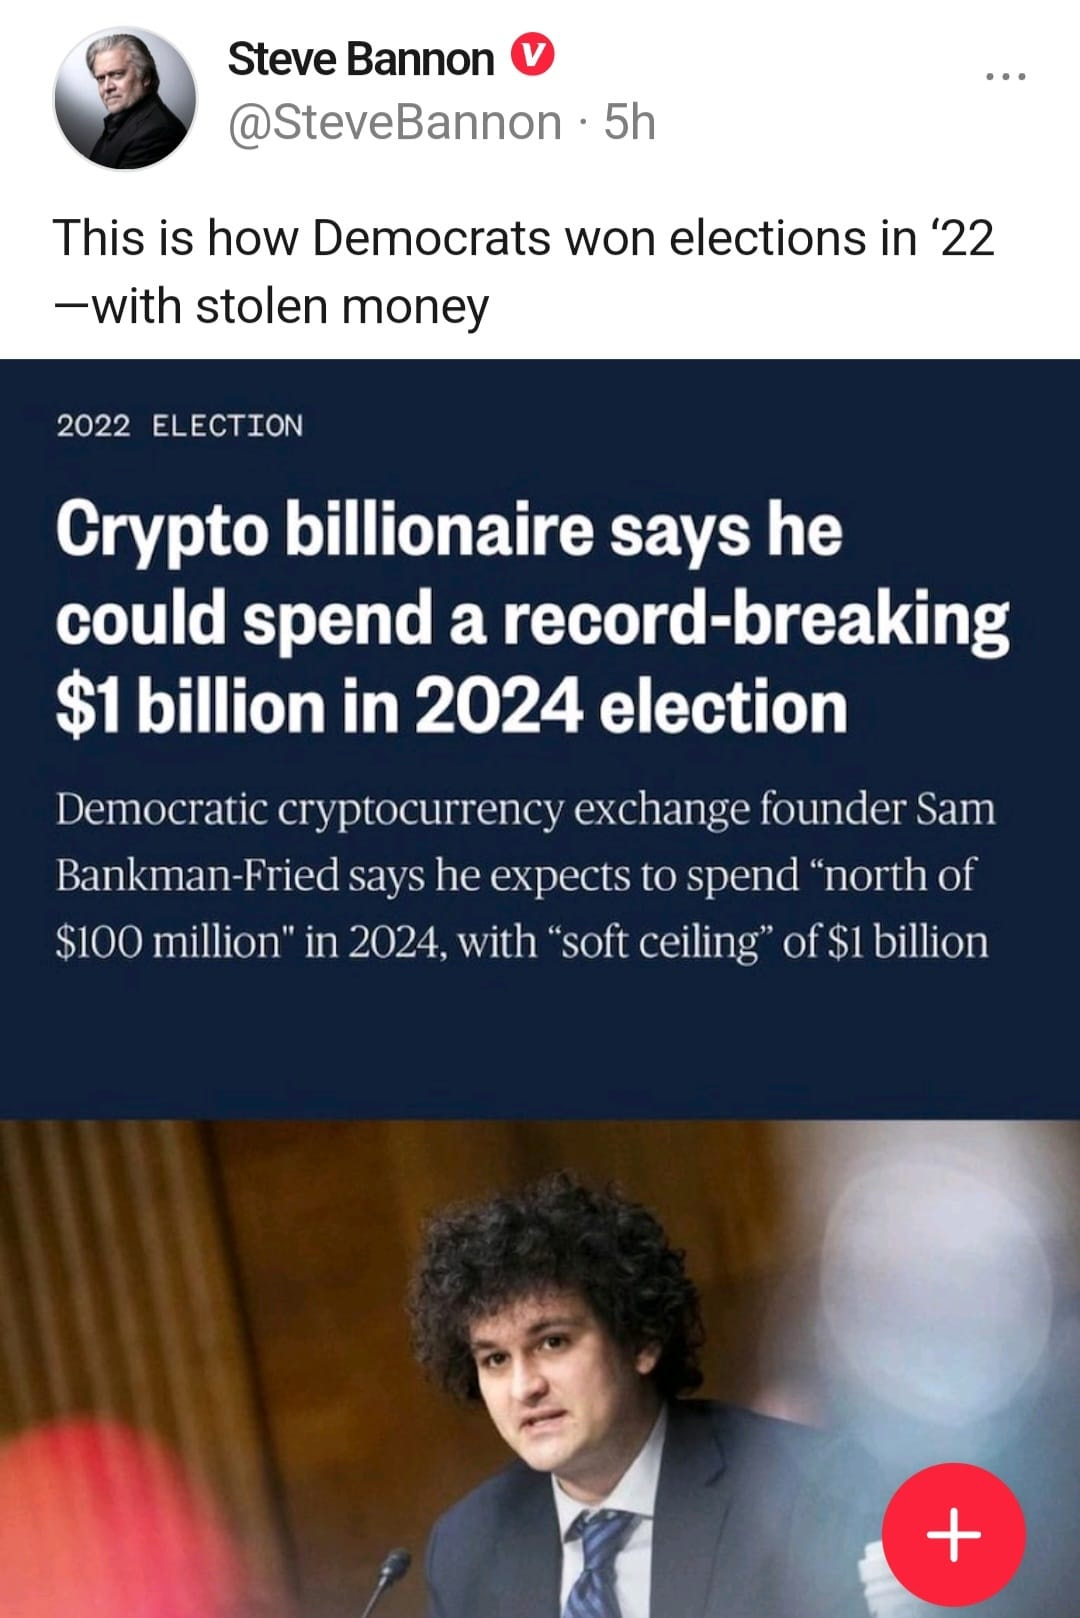 May be an image of 2 people and text that says 'Steve Bannon @SteveBannon 5h This is how Democrats won elections in '22 -with stolen money 2022 ELECTION Crypto billionaire says he could spend a record-breaking $1 billion in 2024 election Democratic cryptocurrency exchange founder Sam Bankman-Fried says he expects to spend "north of $100 million" 2024, with "soft ceiling' of $1 billion'